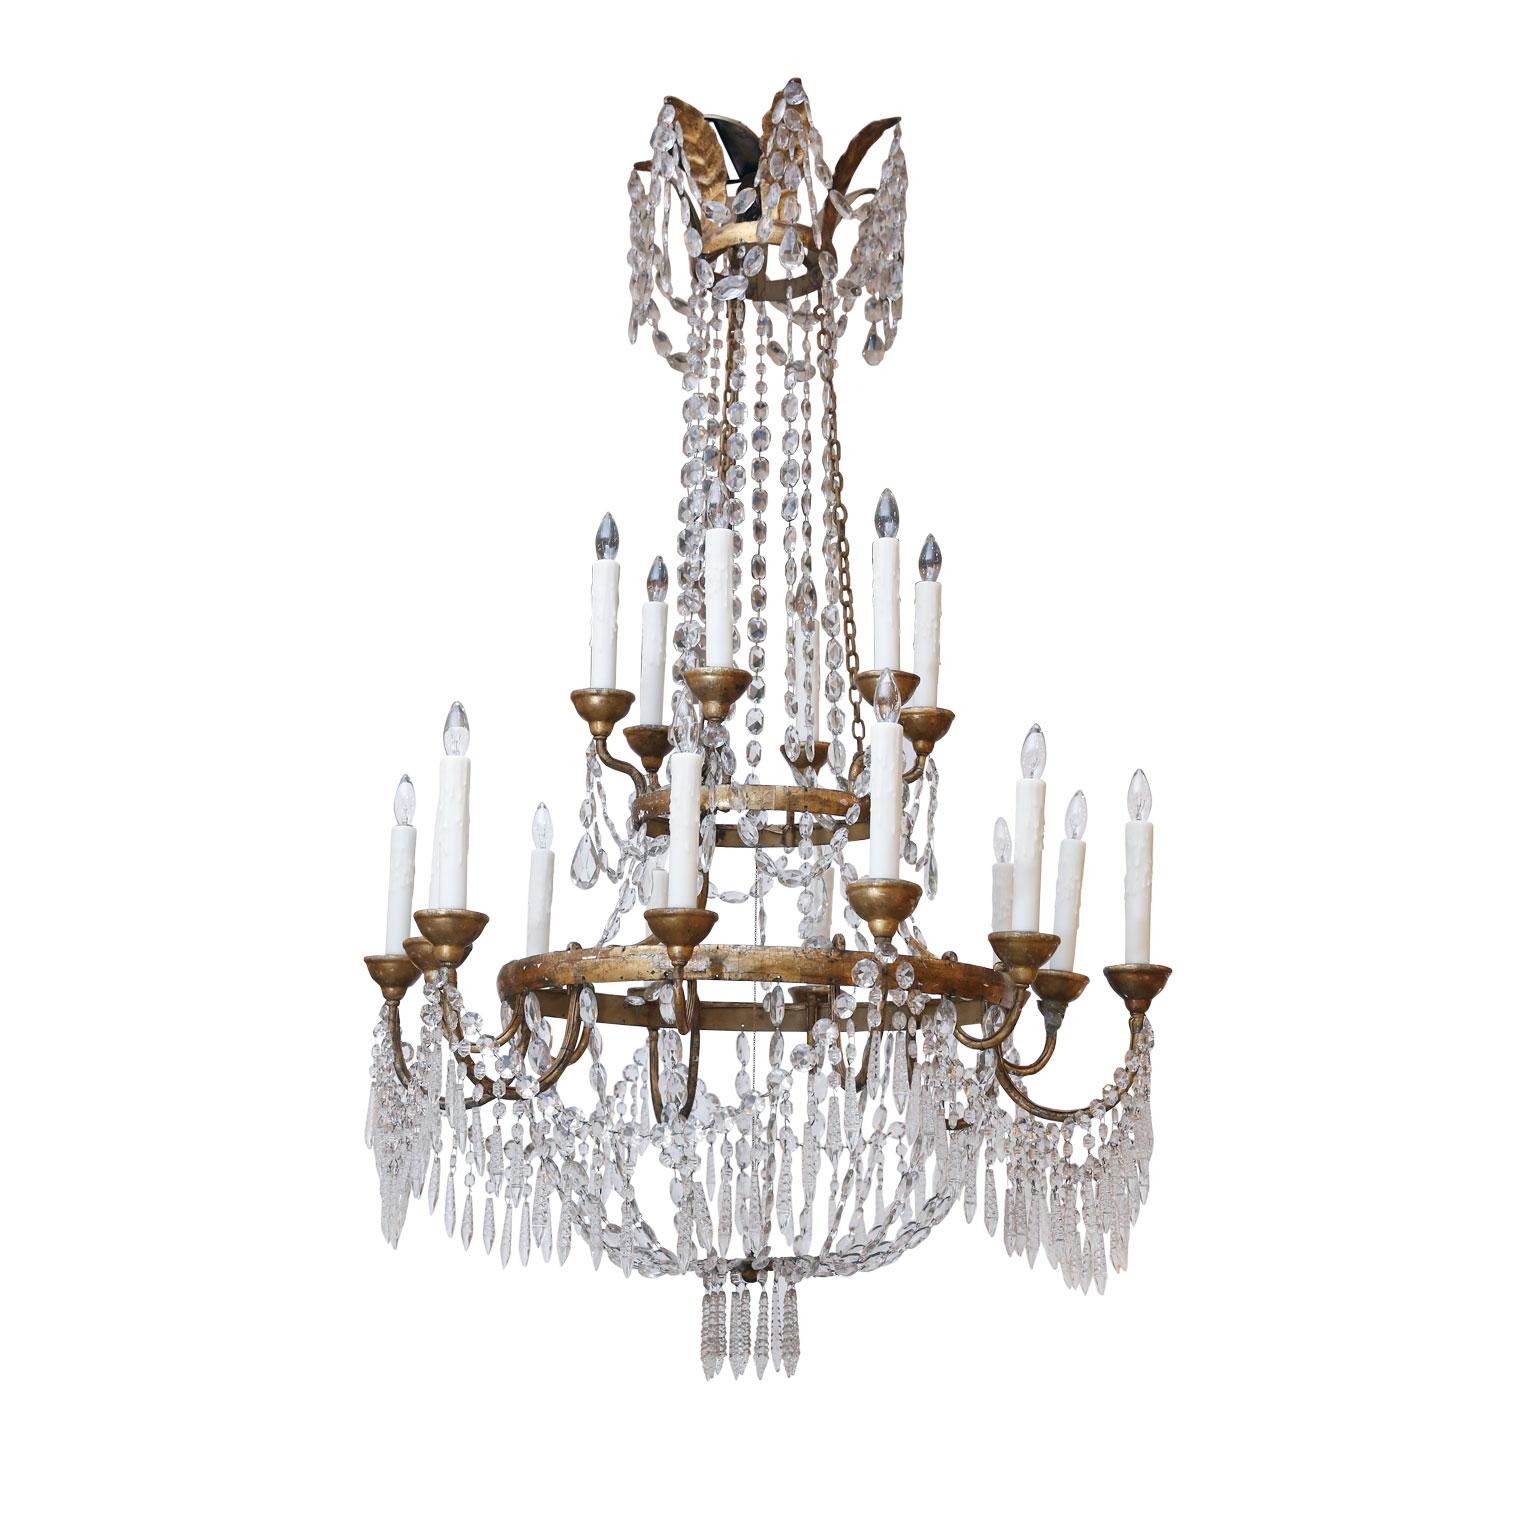 Large scale neoclassical chandelier from Lucca, Italy. Two gilt-iron ring tiers supporting eighteen arms (twelve lower and six upper). Decorated in original, or early, cut crystal prisms and pressed glass pendants. Newly wired using all UL listed